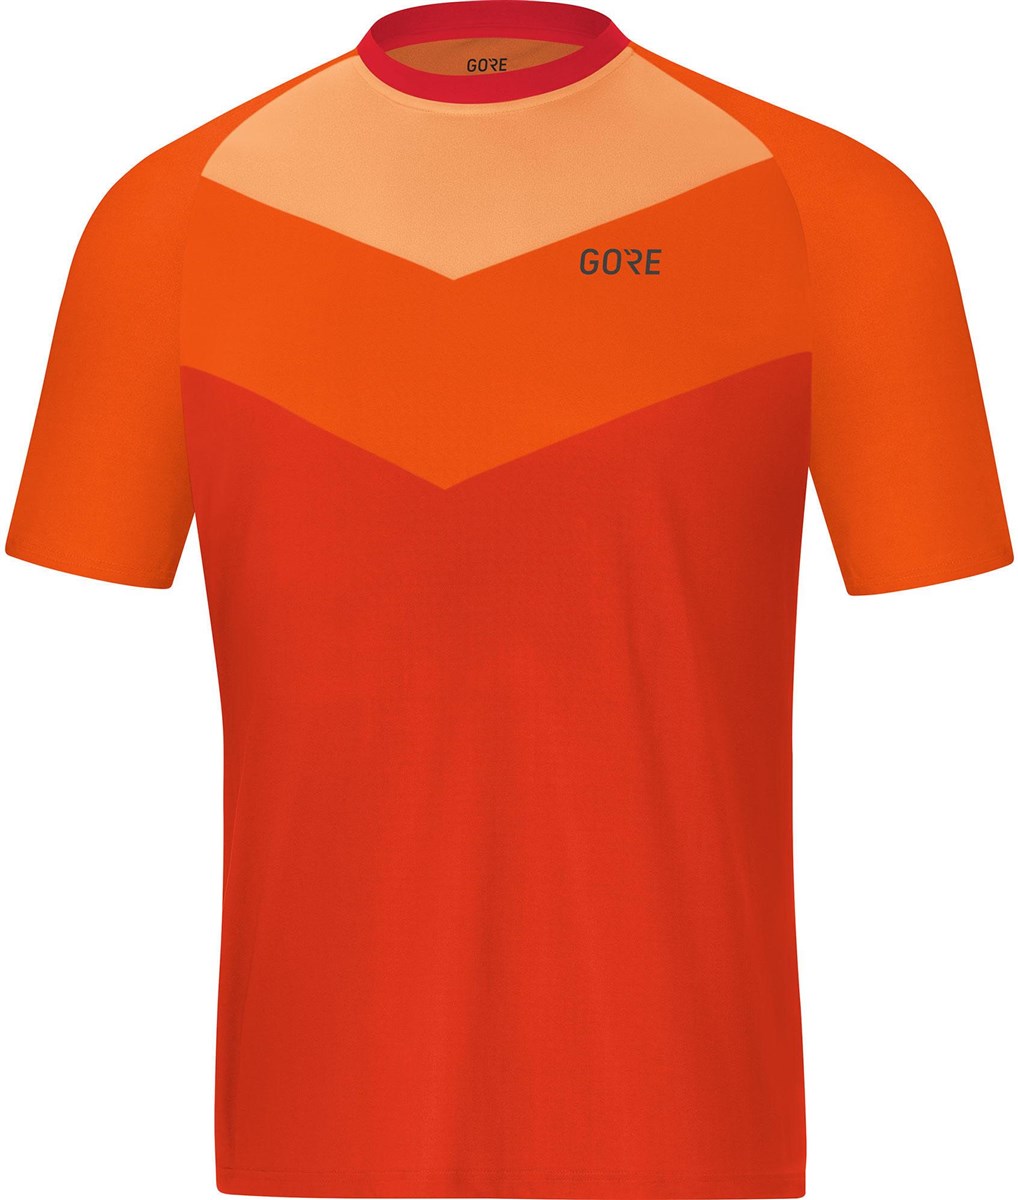 Gore C5 Trail Short Sleeve Jersey product image